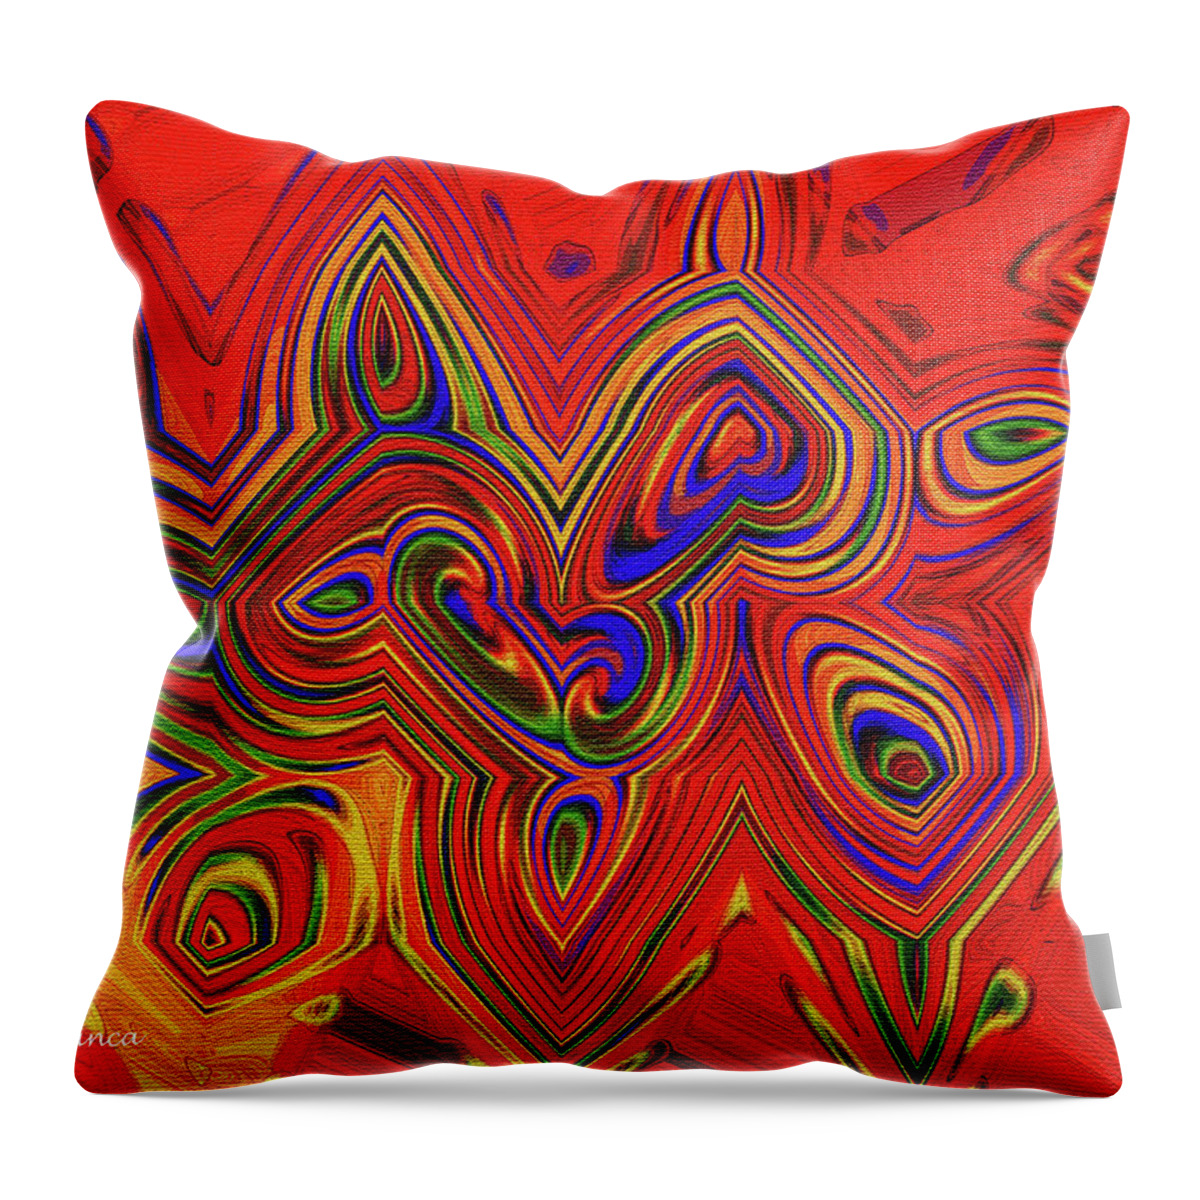 Red Sun Abstract # 16 Throw Pillow featuring the digital art Red Sun Abstract # 16 by Tom Janca